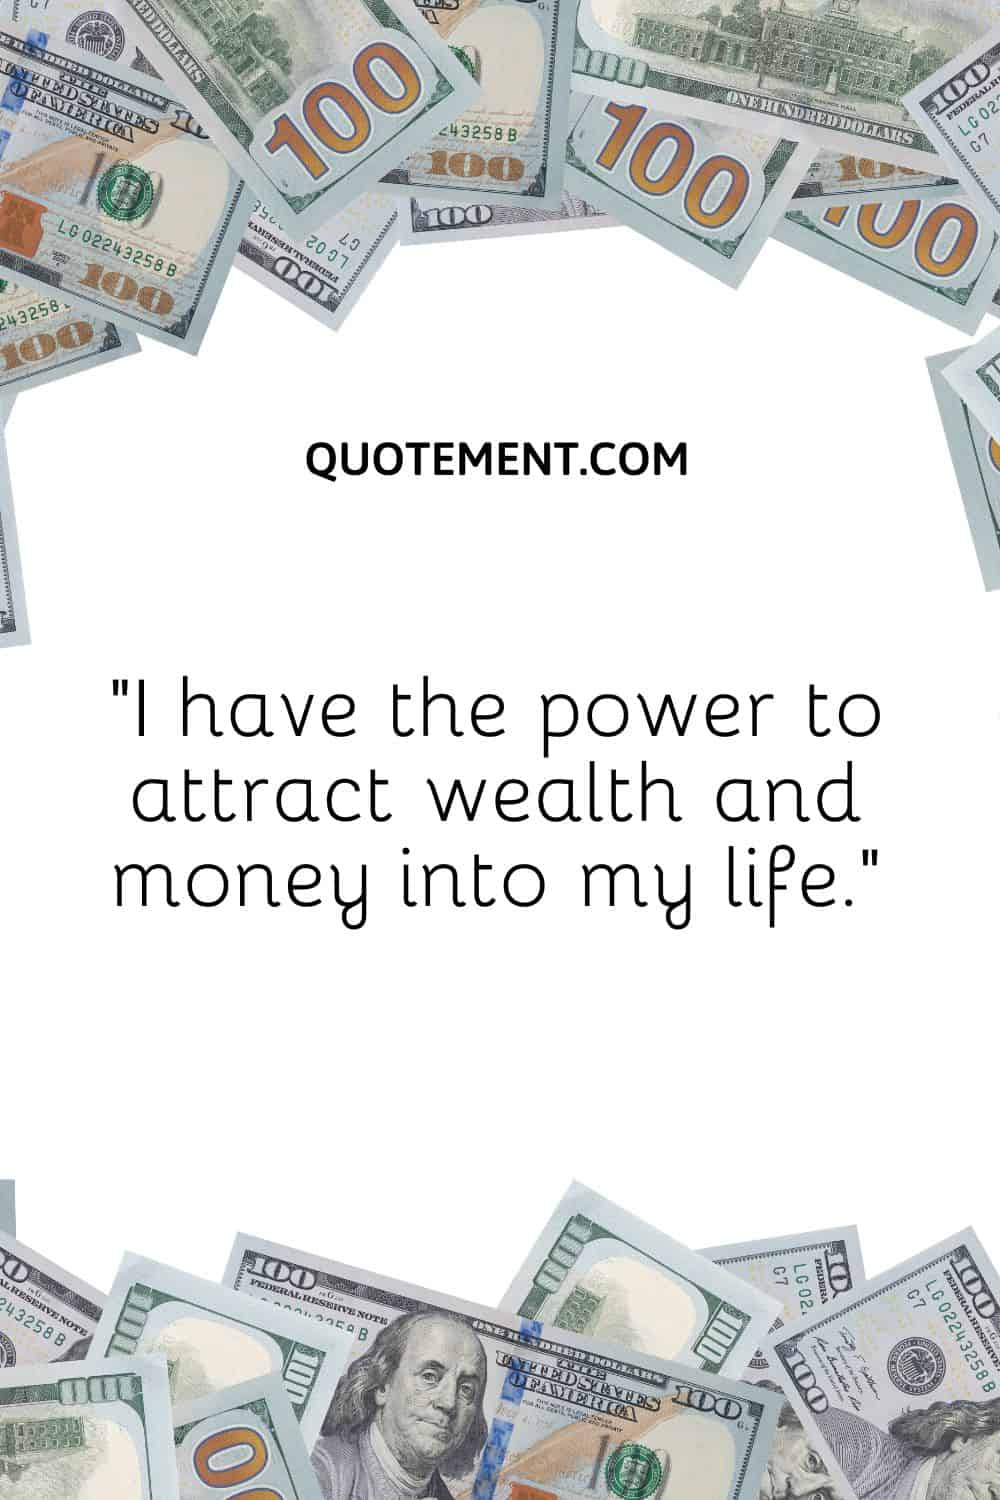 “I have the power to attract wealth and money into my life.”